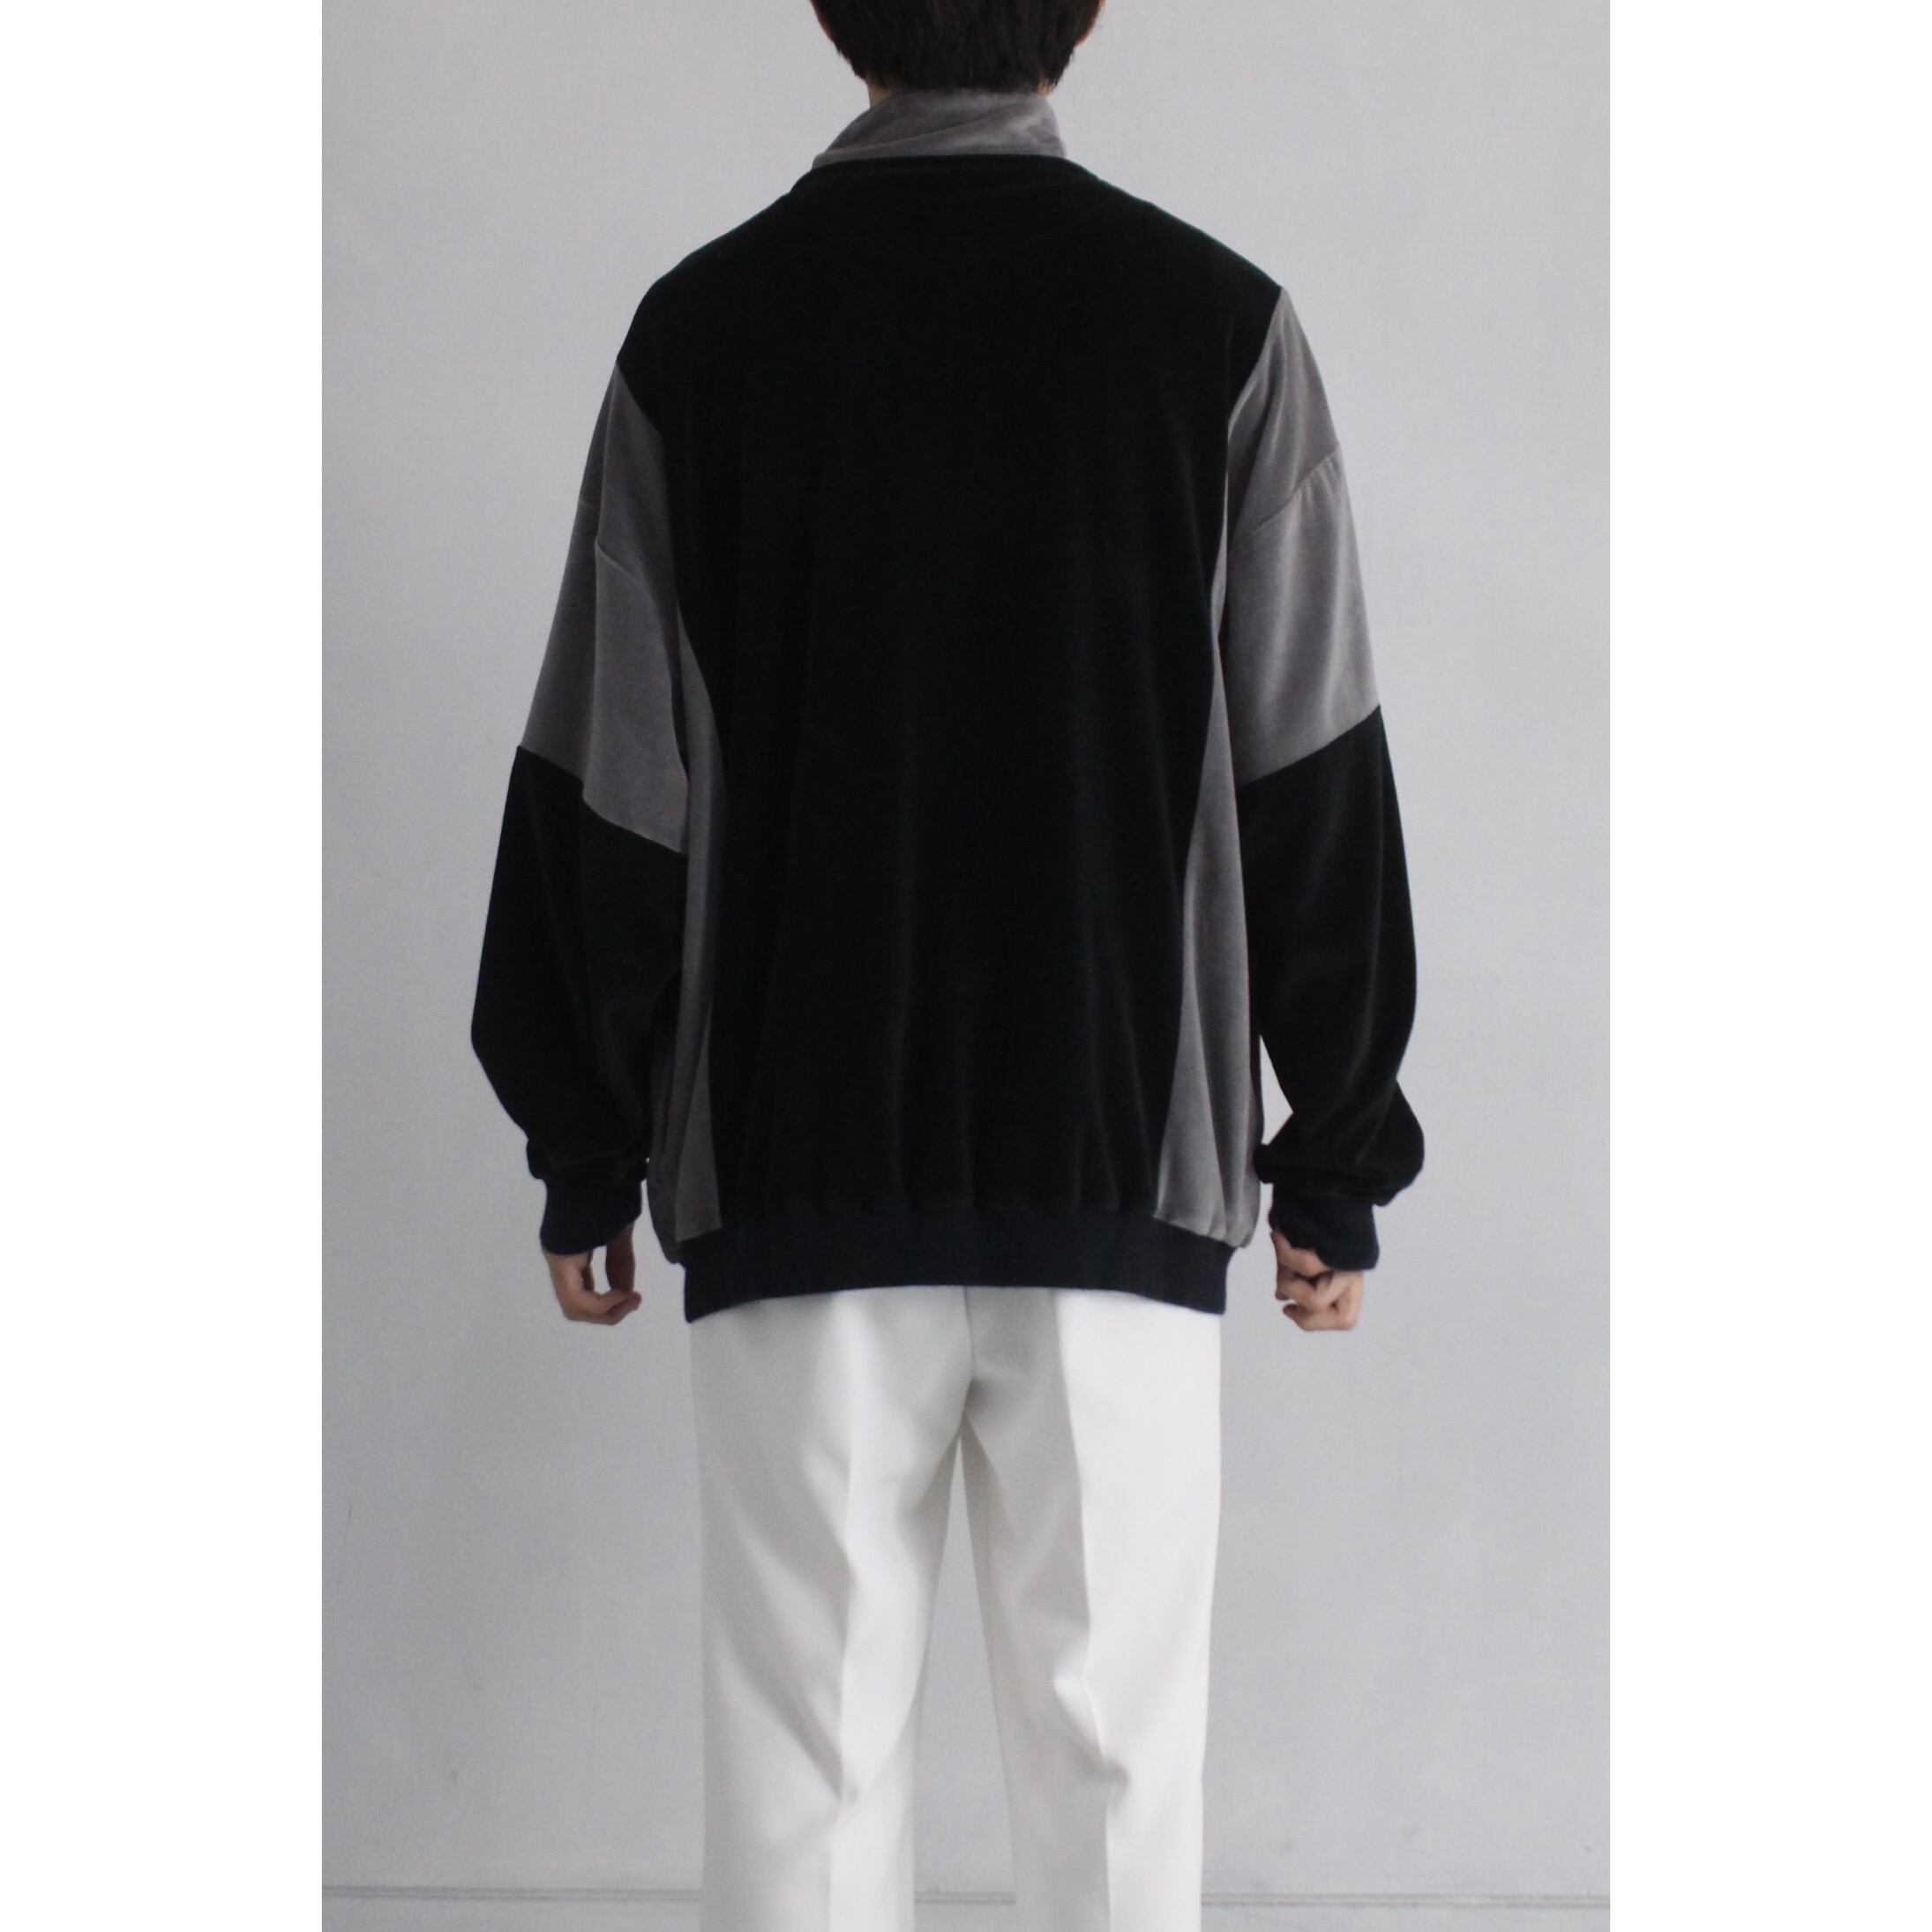 【COUOTSU】Norm Thompson over sized velor track jacket made in macau -378-